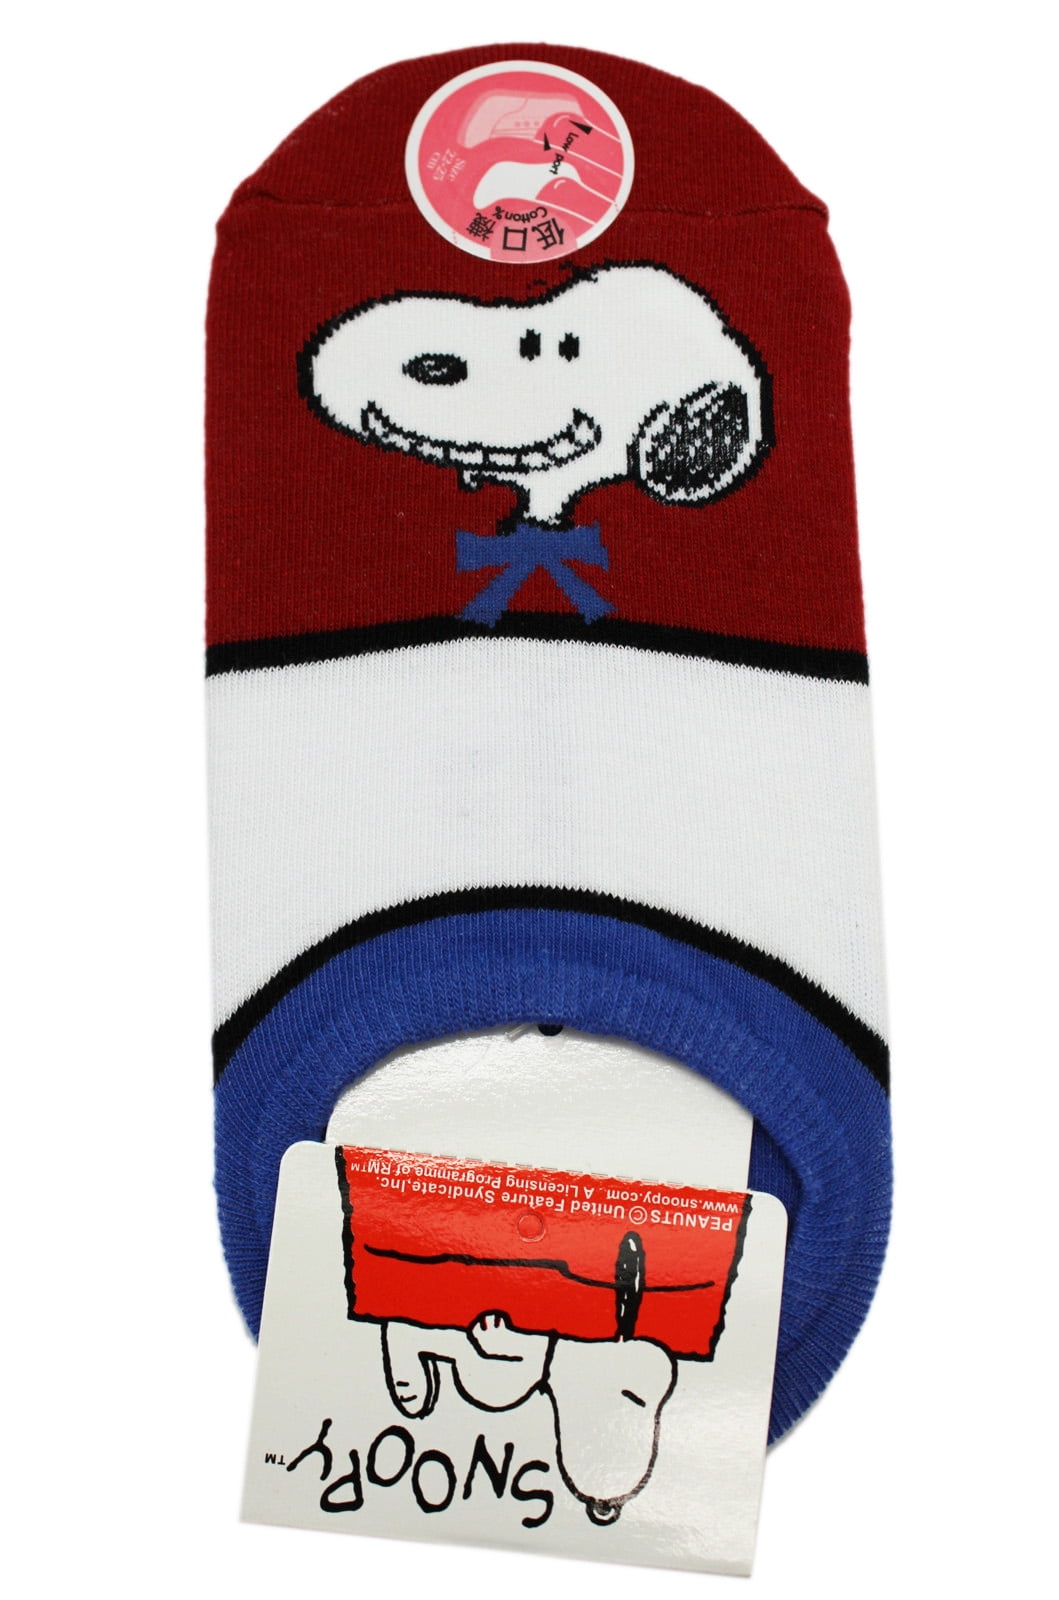 2 Pairs Of Smiling Snoopy Socks - Red, White, and Blue Girls Socks ...